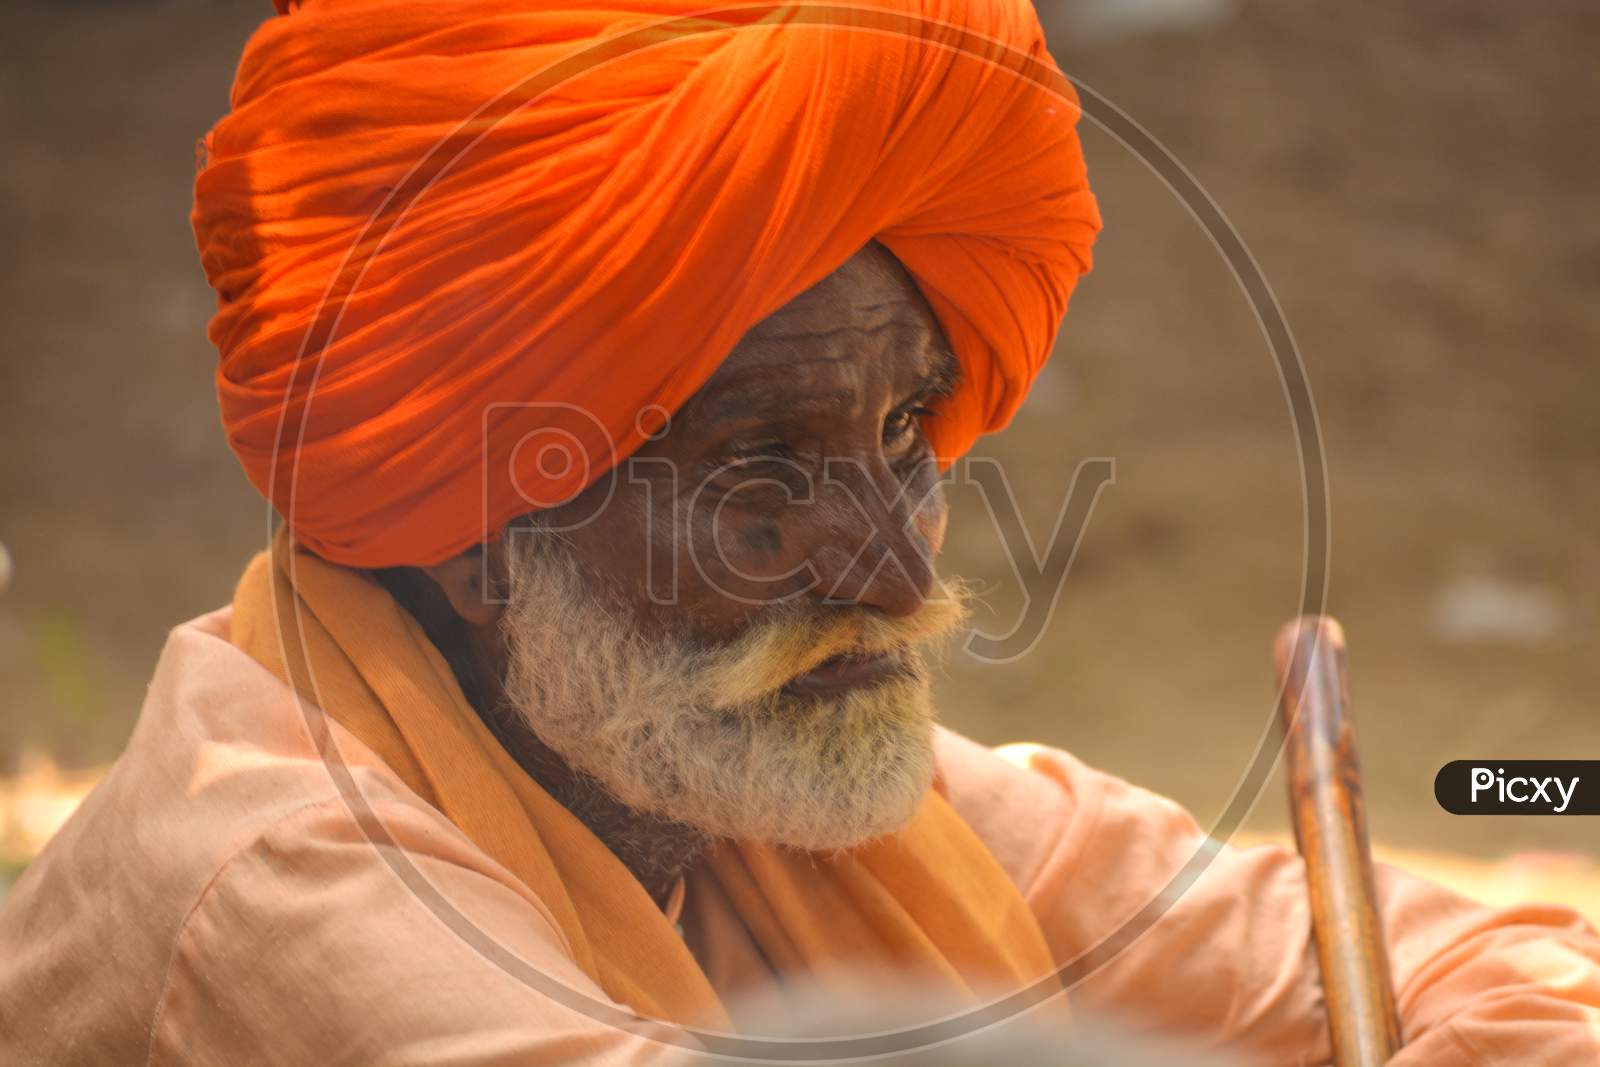 Head Shot Of Elderly Old Man Indian Shivite Sadhu With Orange Colored Turban On His Head With Grey Beard